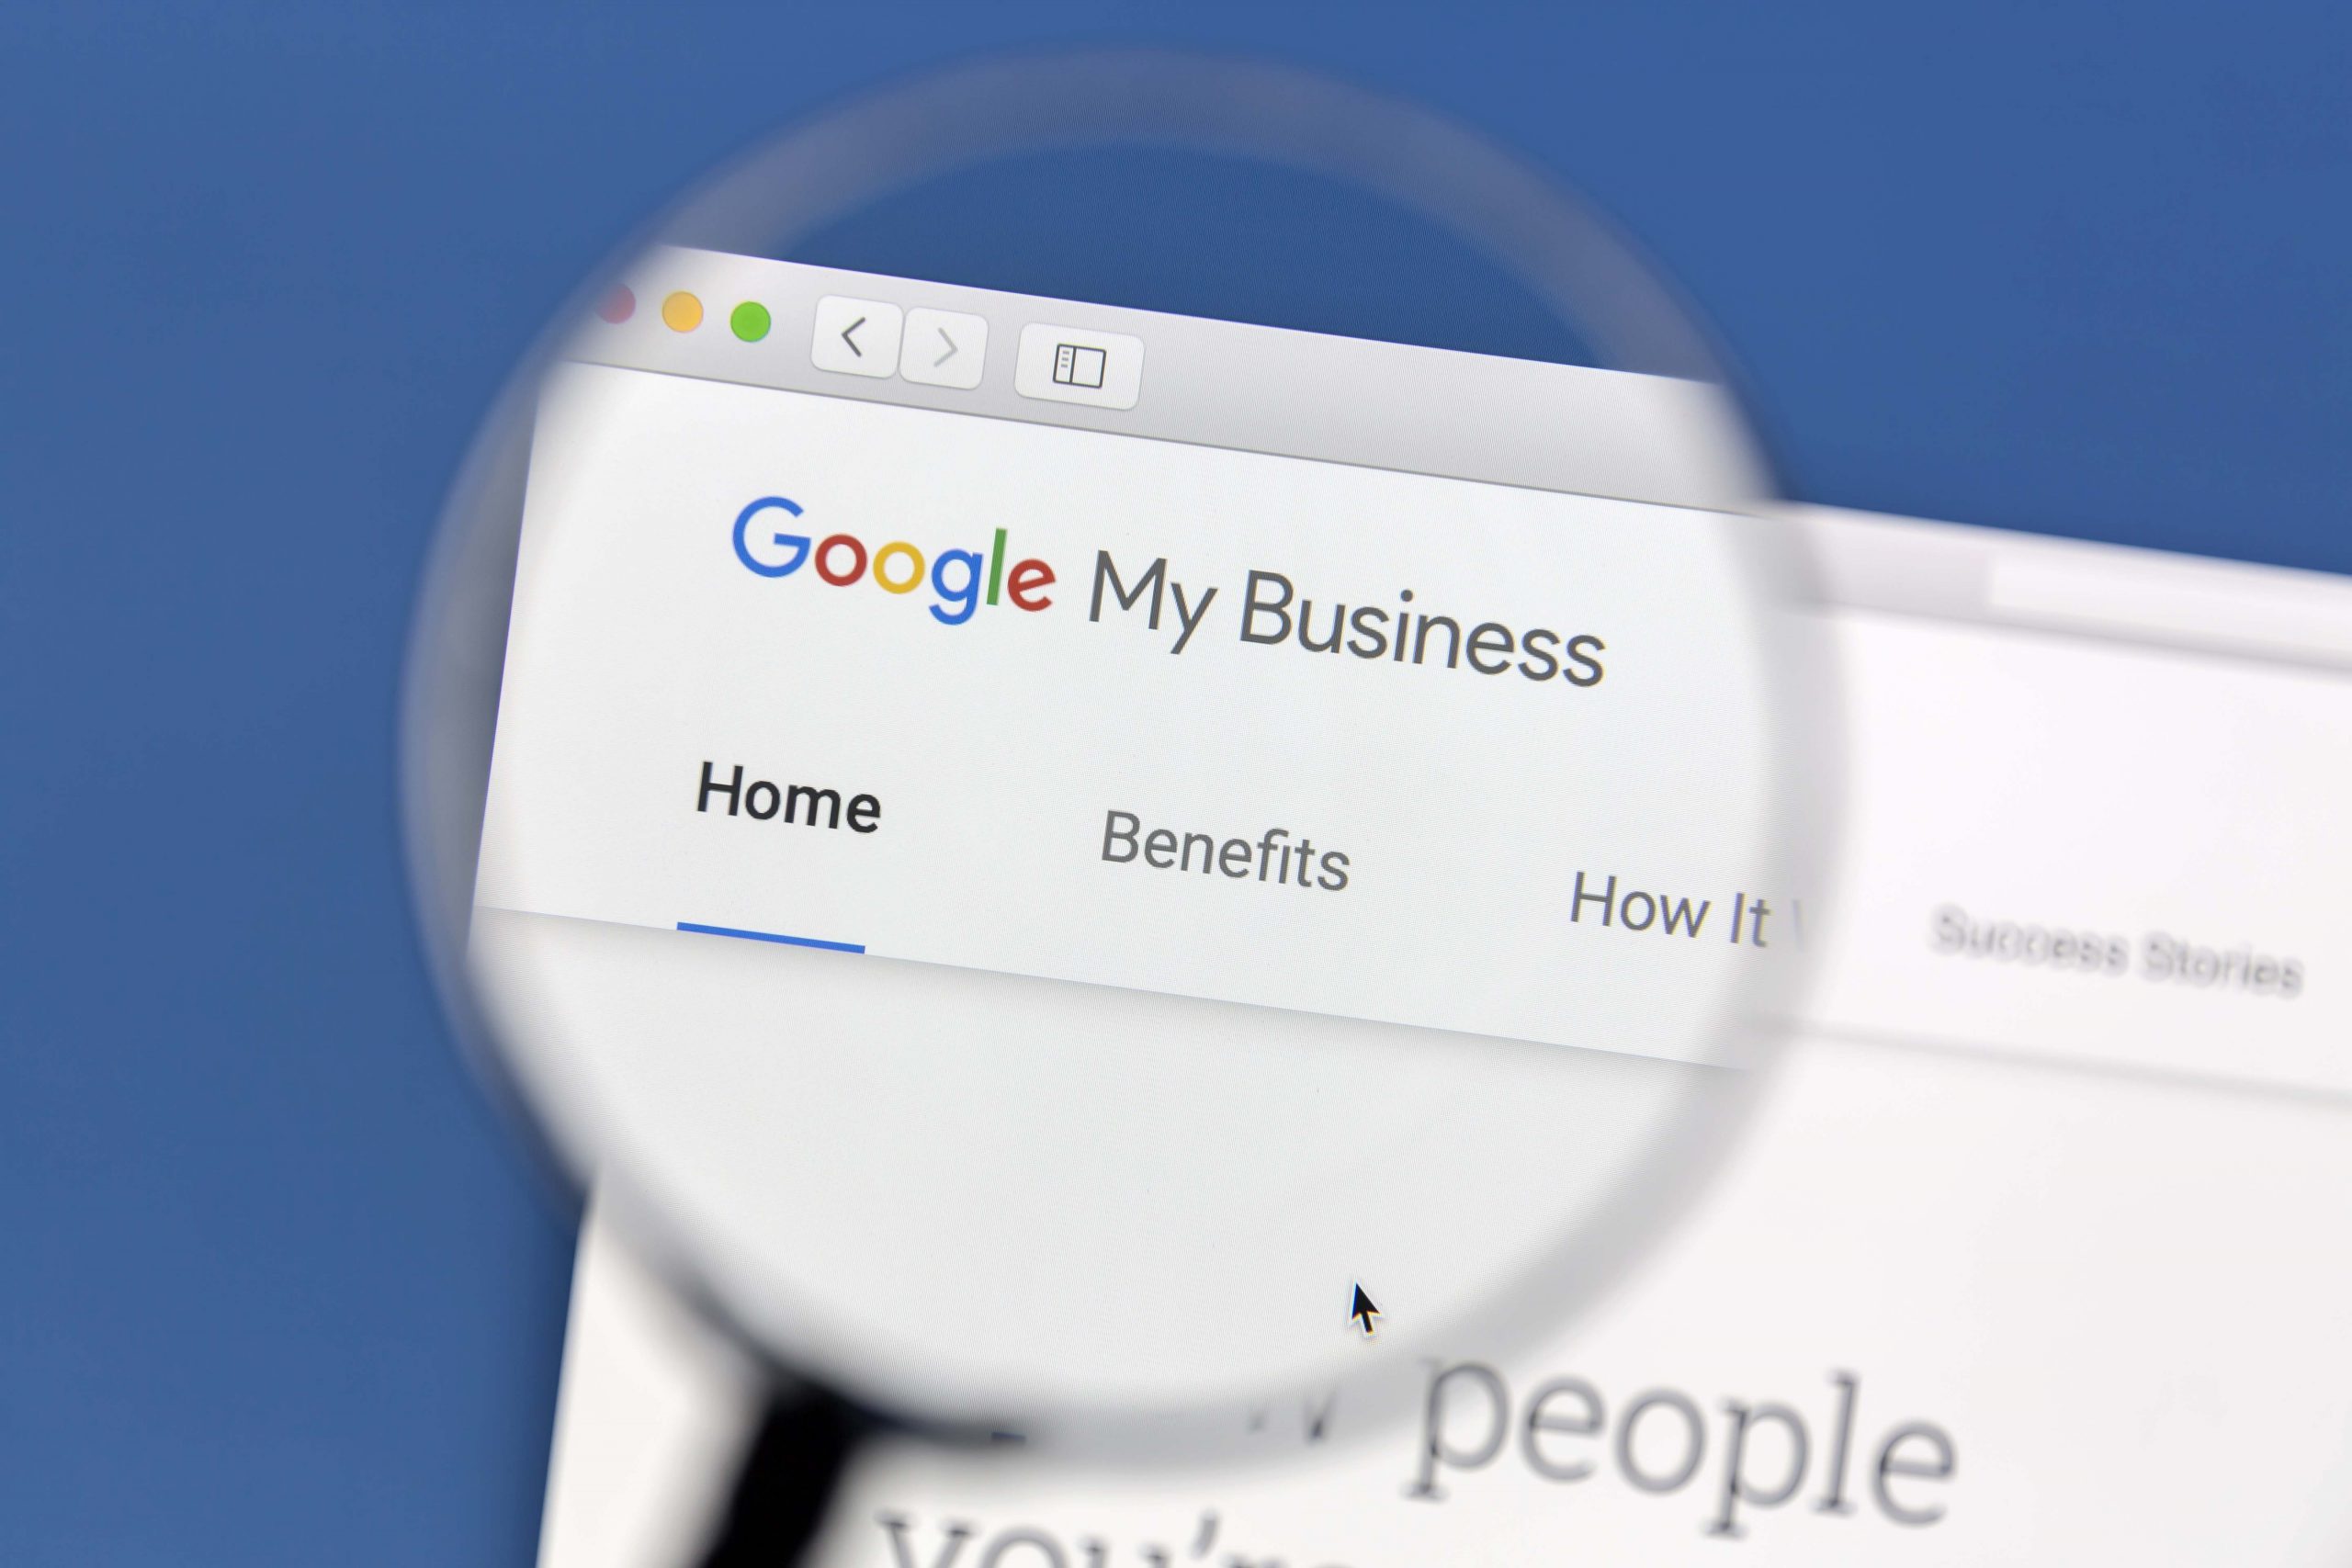 How to optimise your Google My Business listing